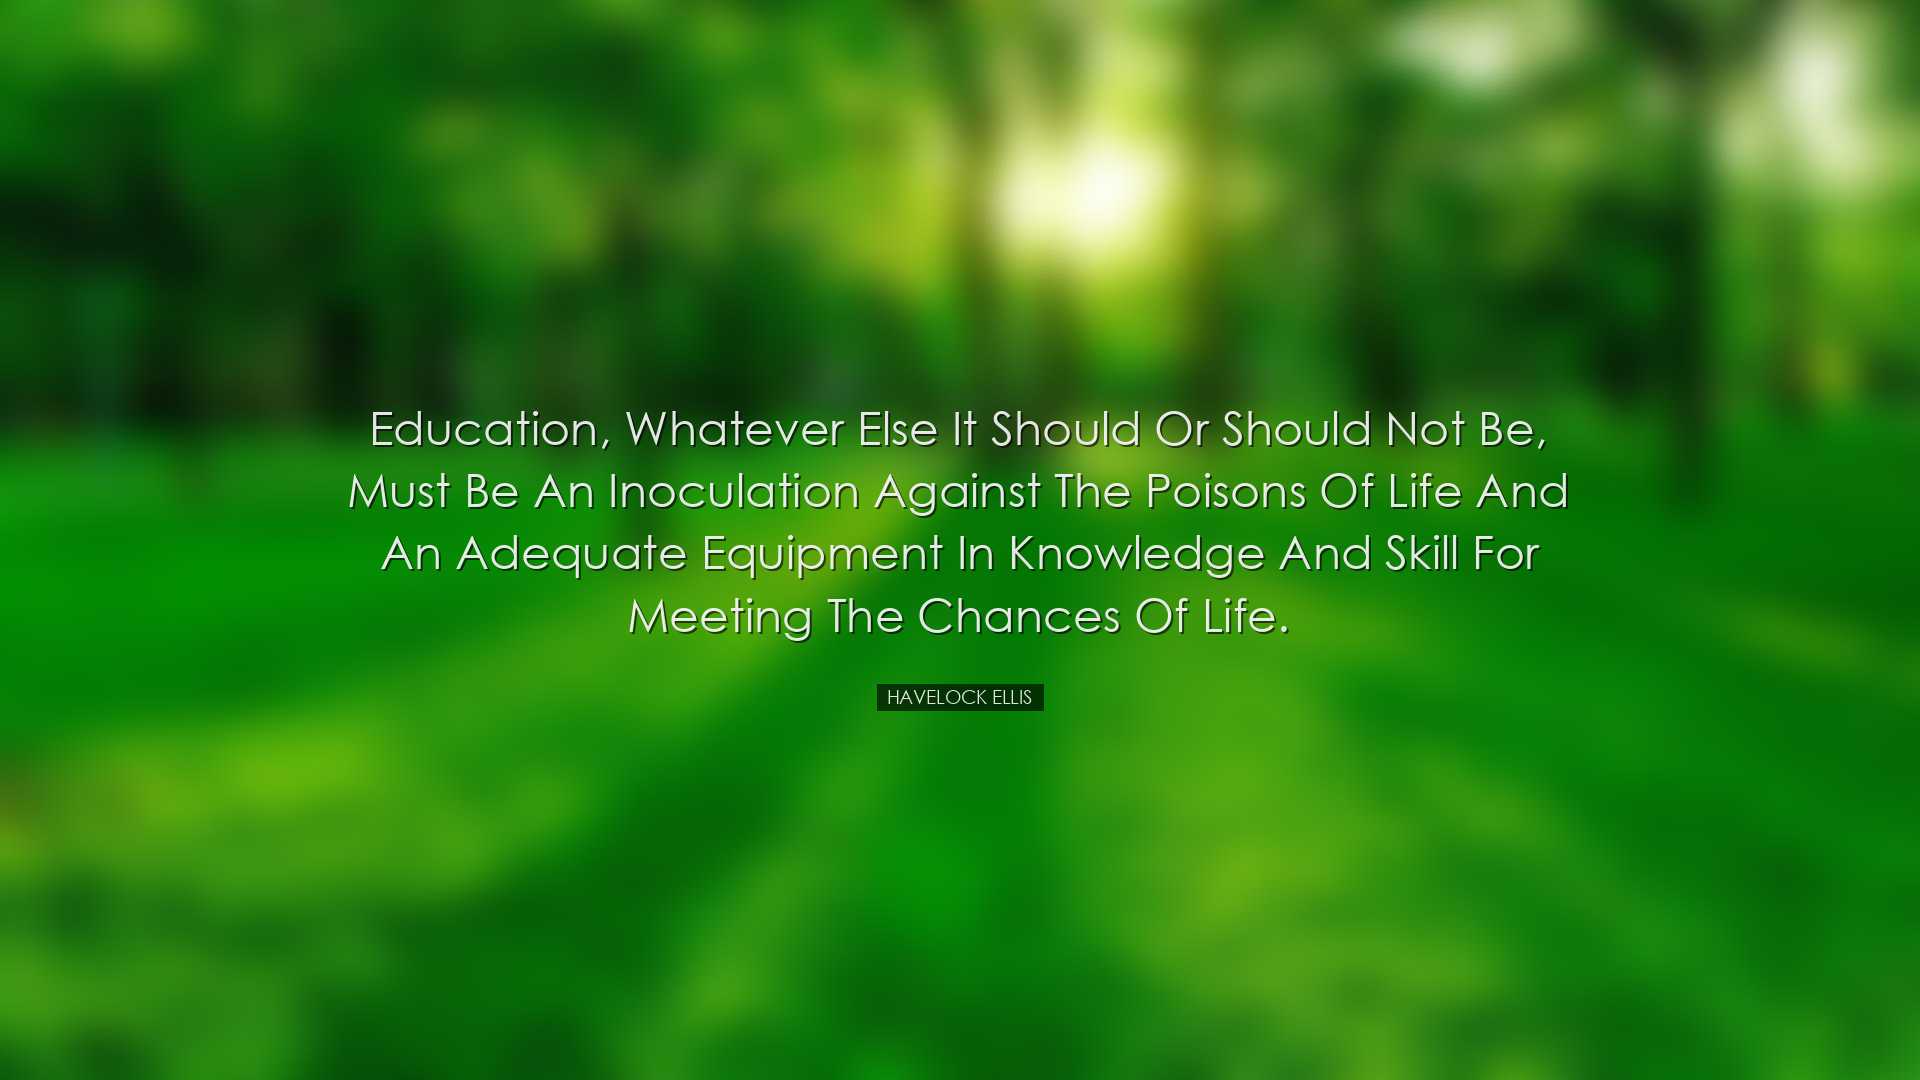 Education, whatever else it should or should not be, must be an in